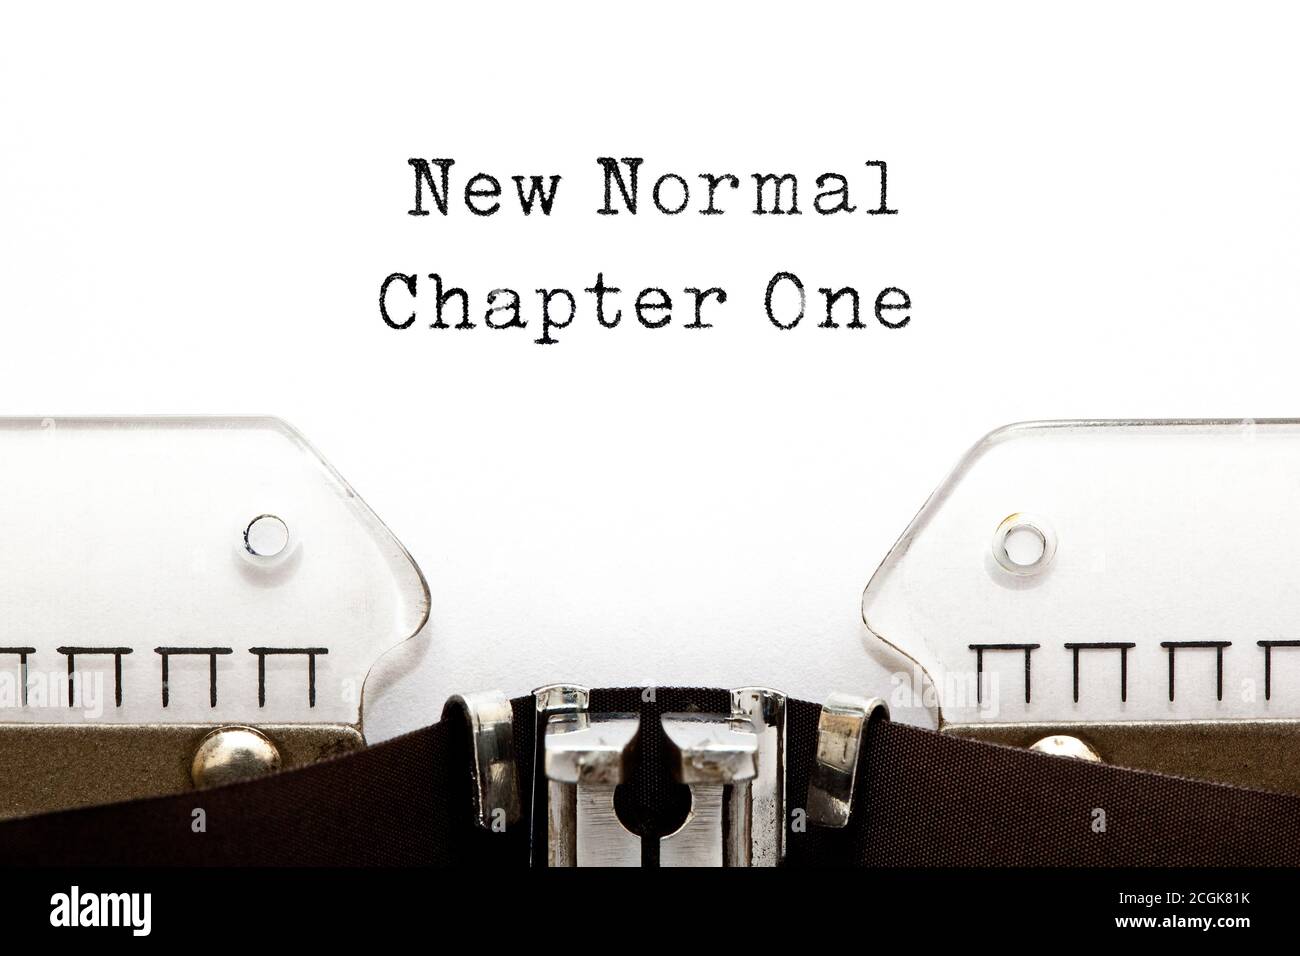 New Normal Chapter One typed on vintage typewriter. Concept about the new normal economic and social situation. Stock Photo